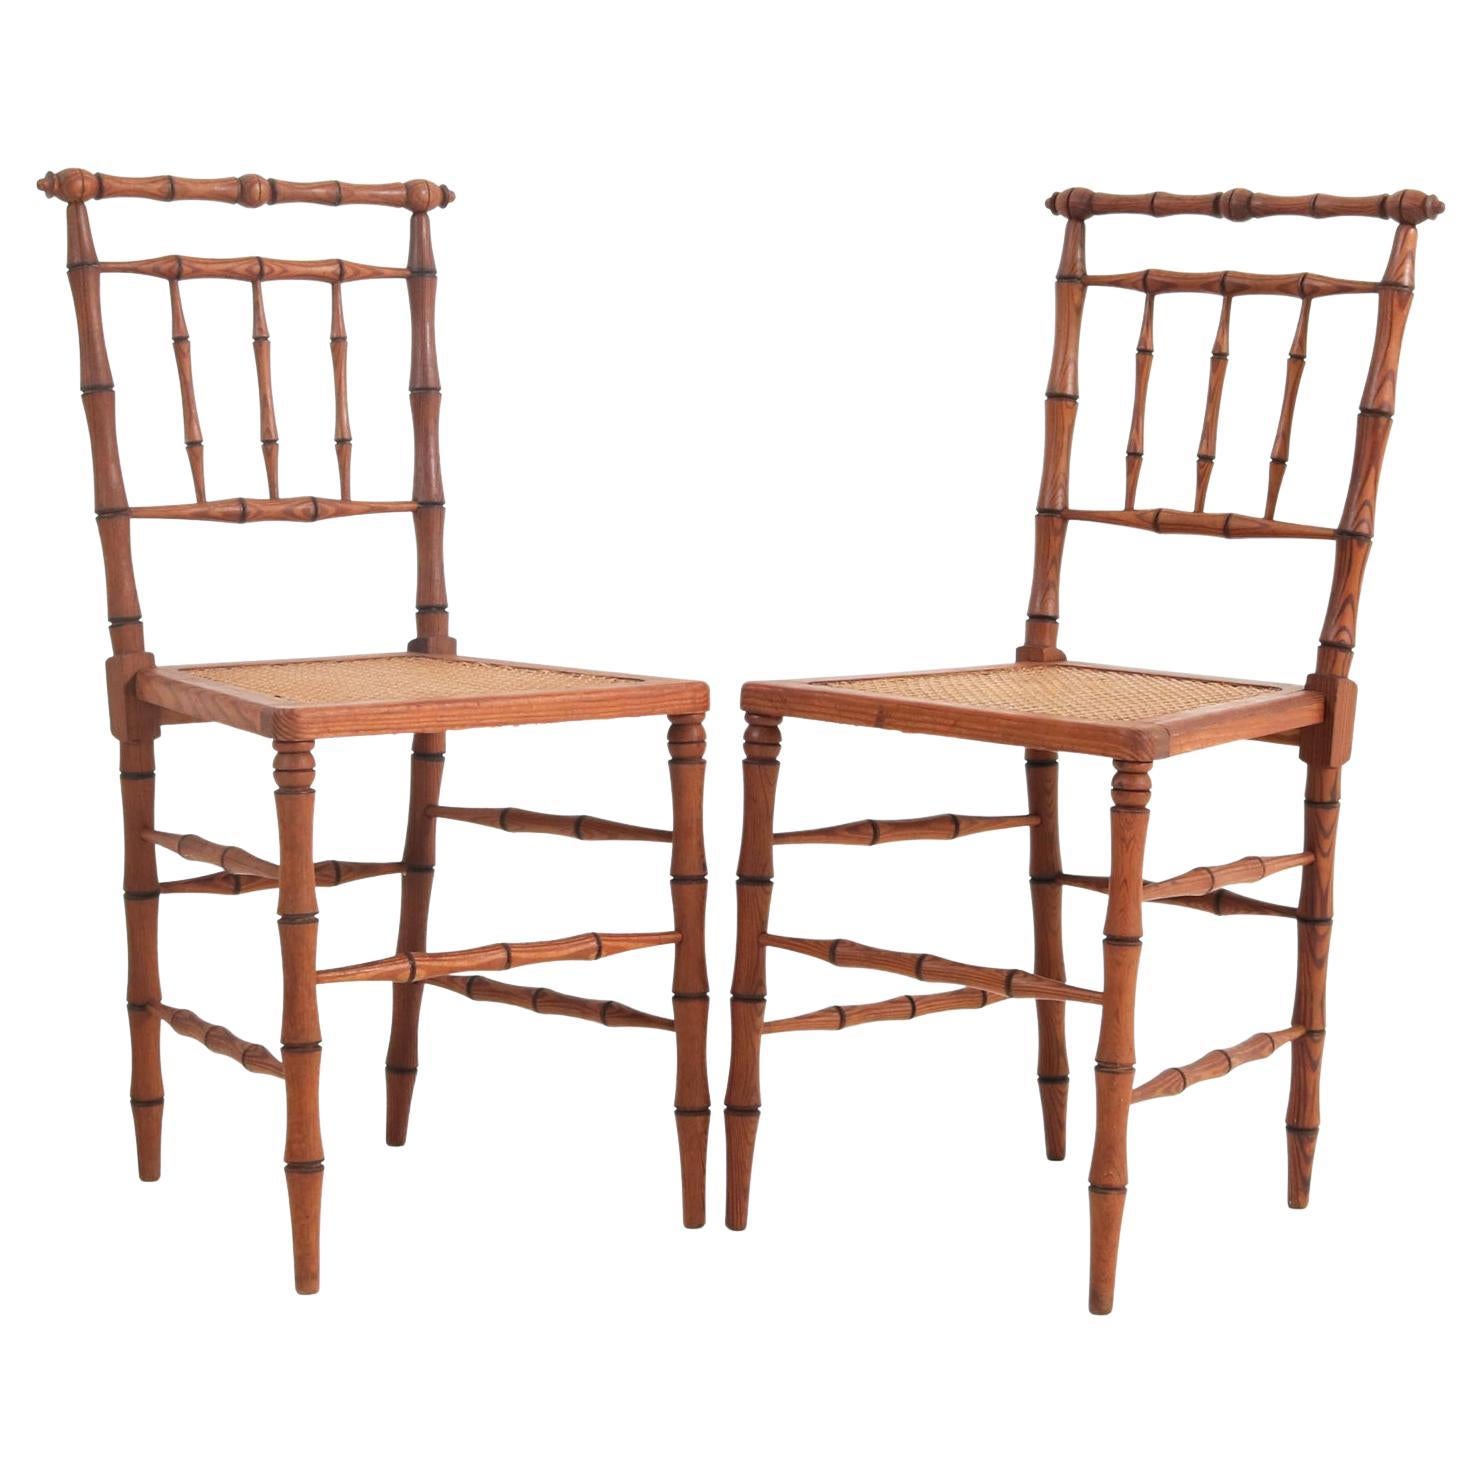 Pair of Art Nouveau Faux Bamboo Side Chairs